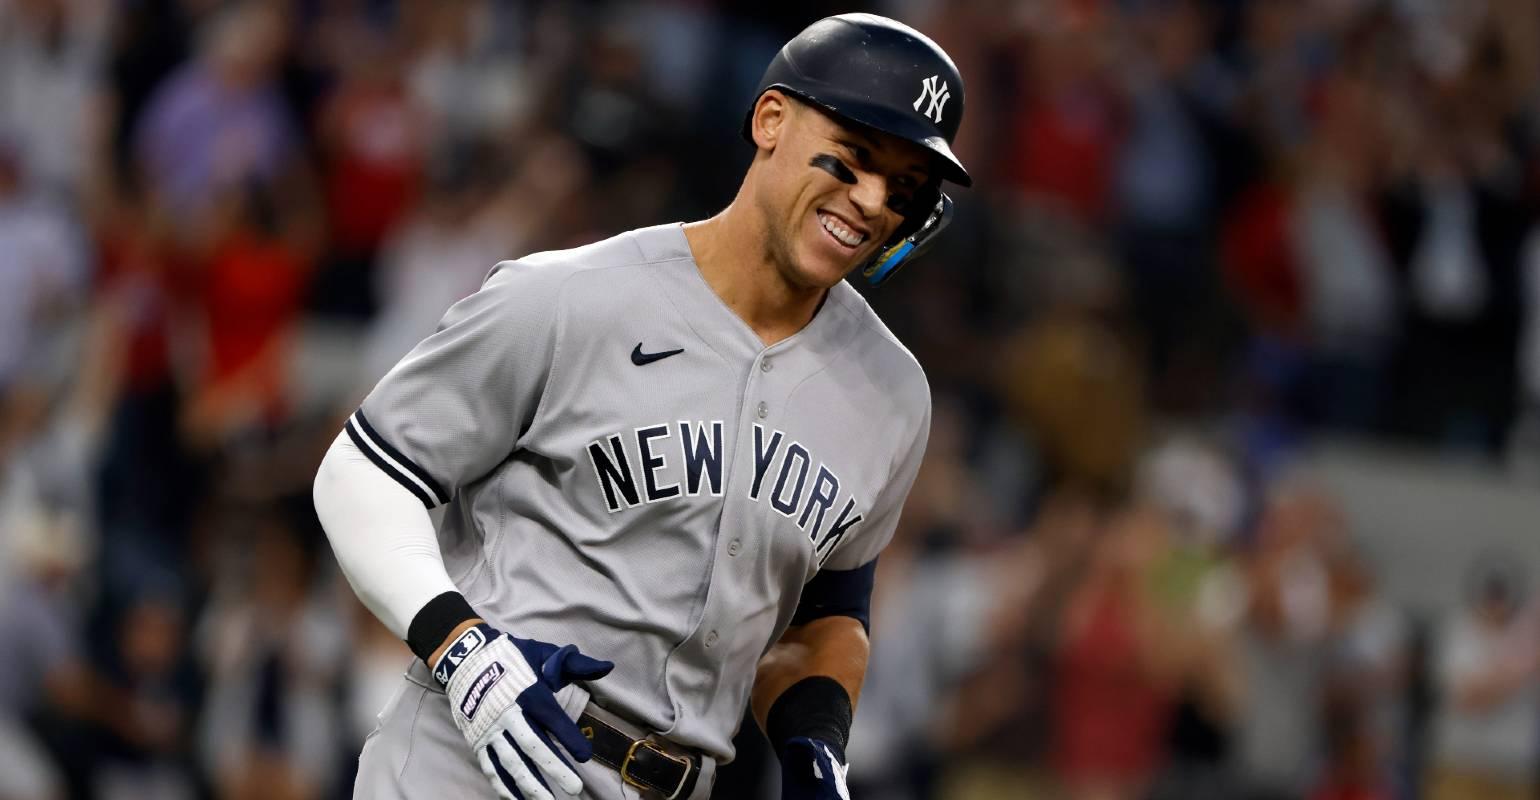 New York Yankees' Aaron Judge smiles after a home run by Yankees